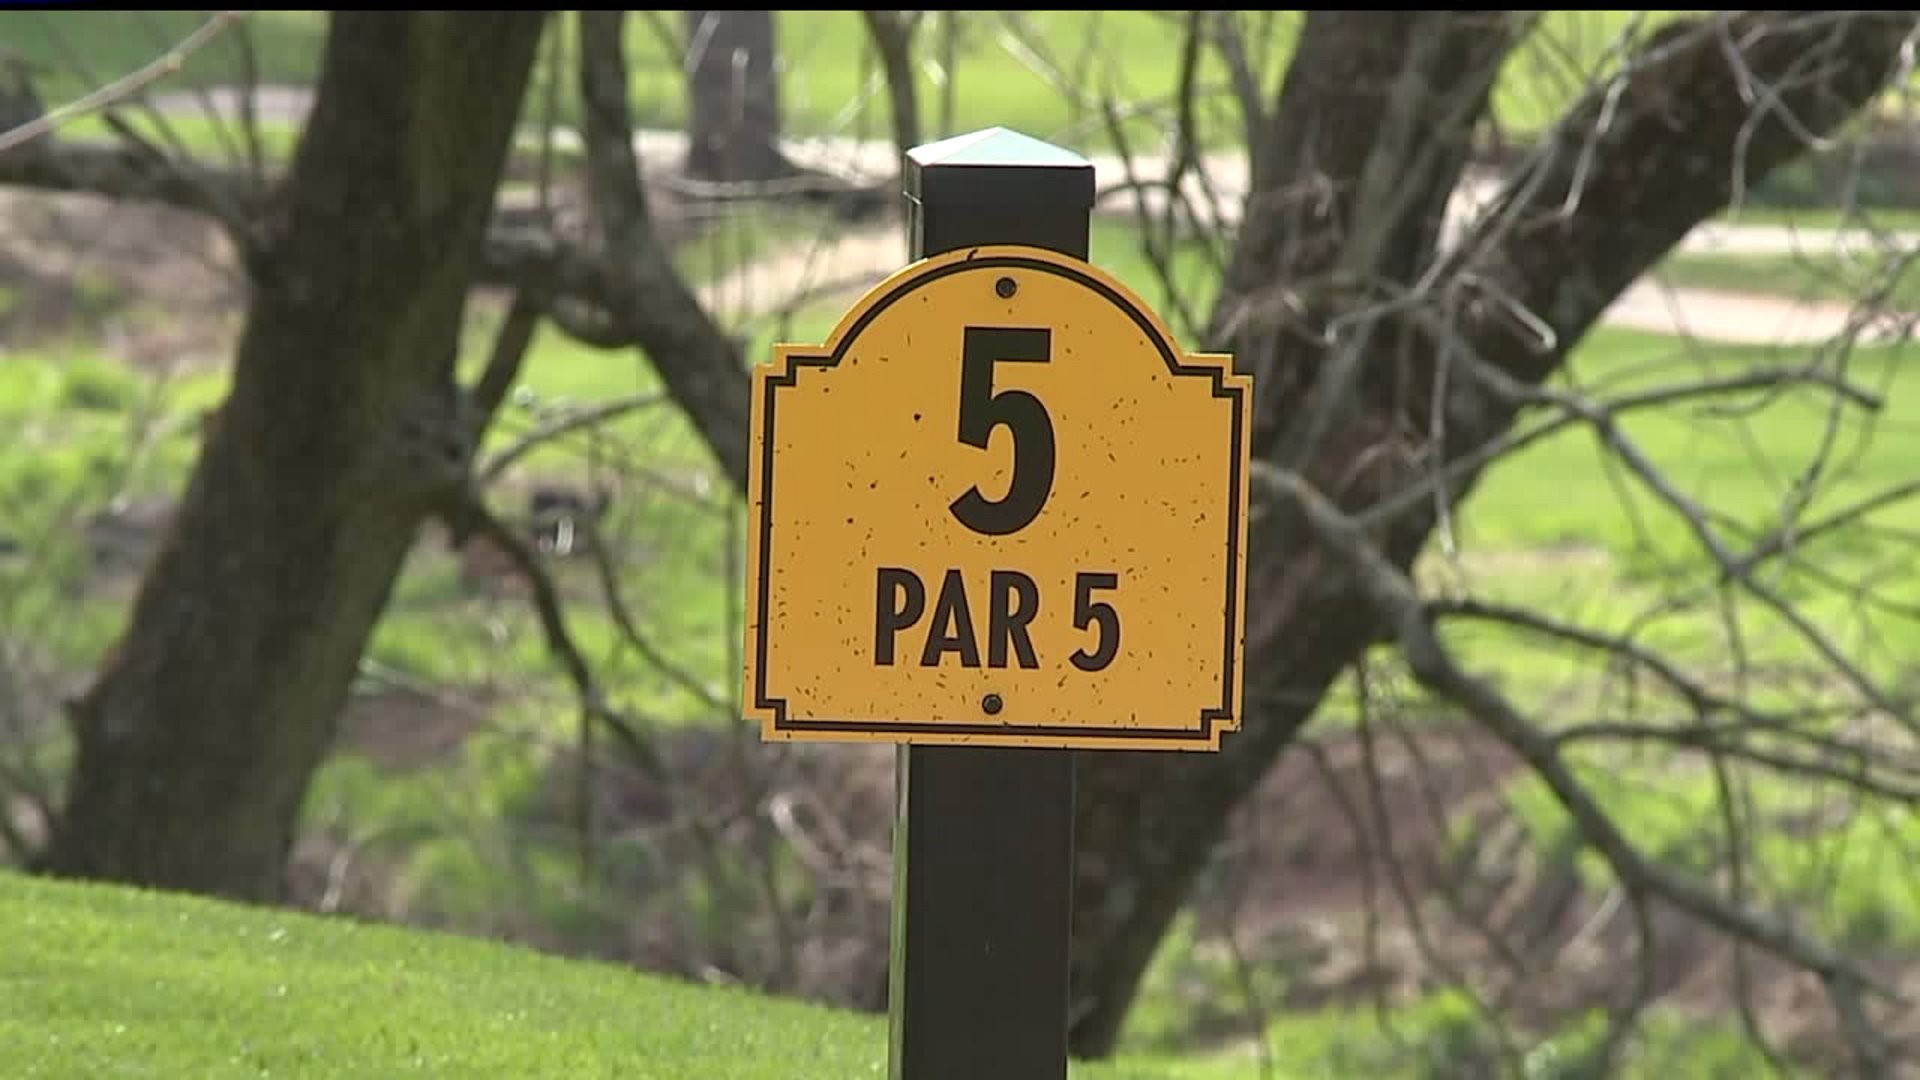 Golf club controversy gains national attention, local officials respond